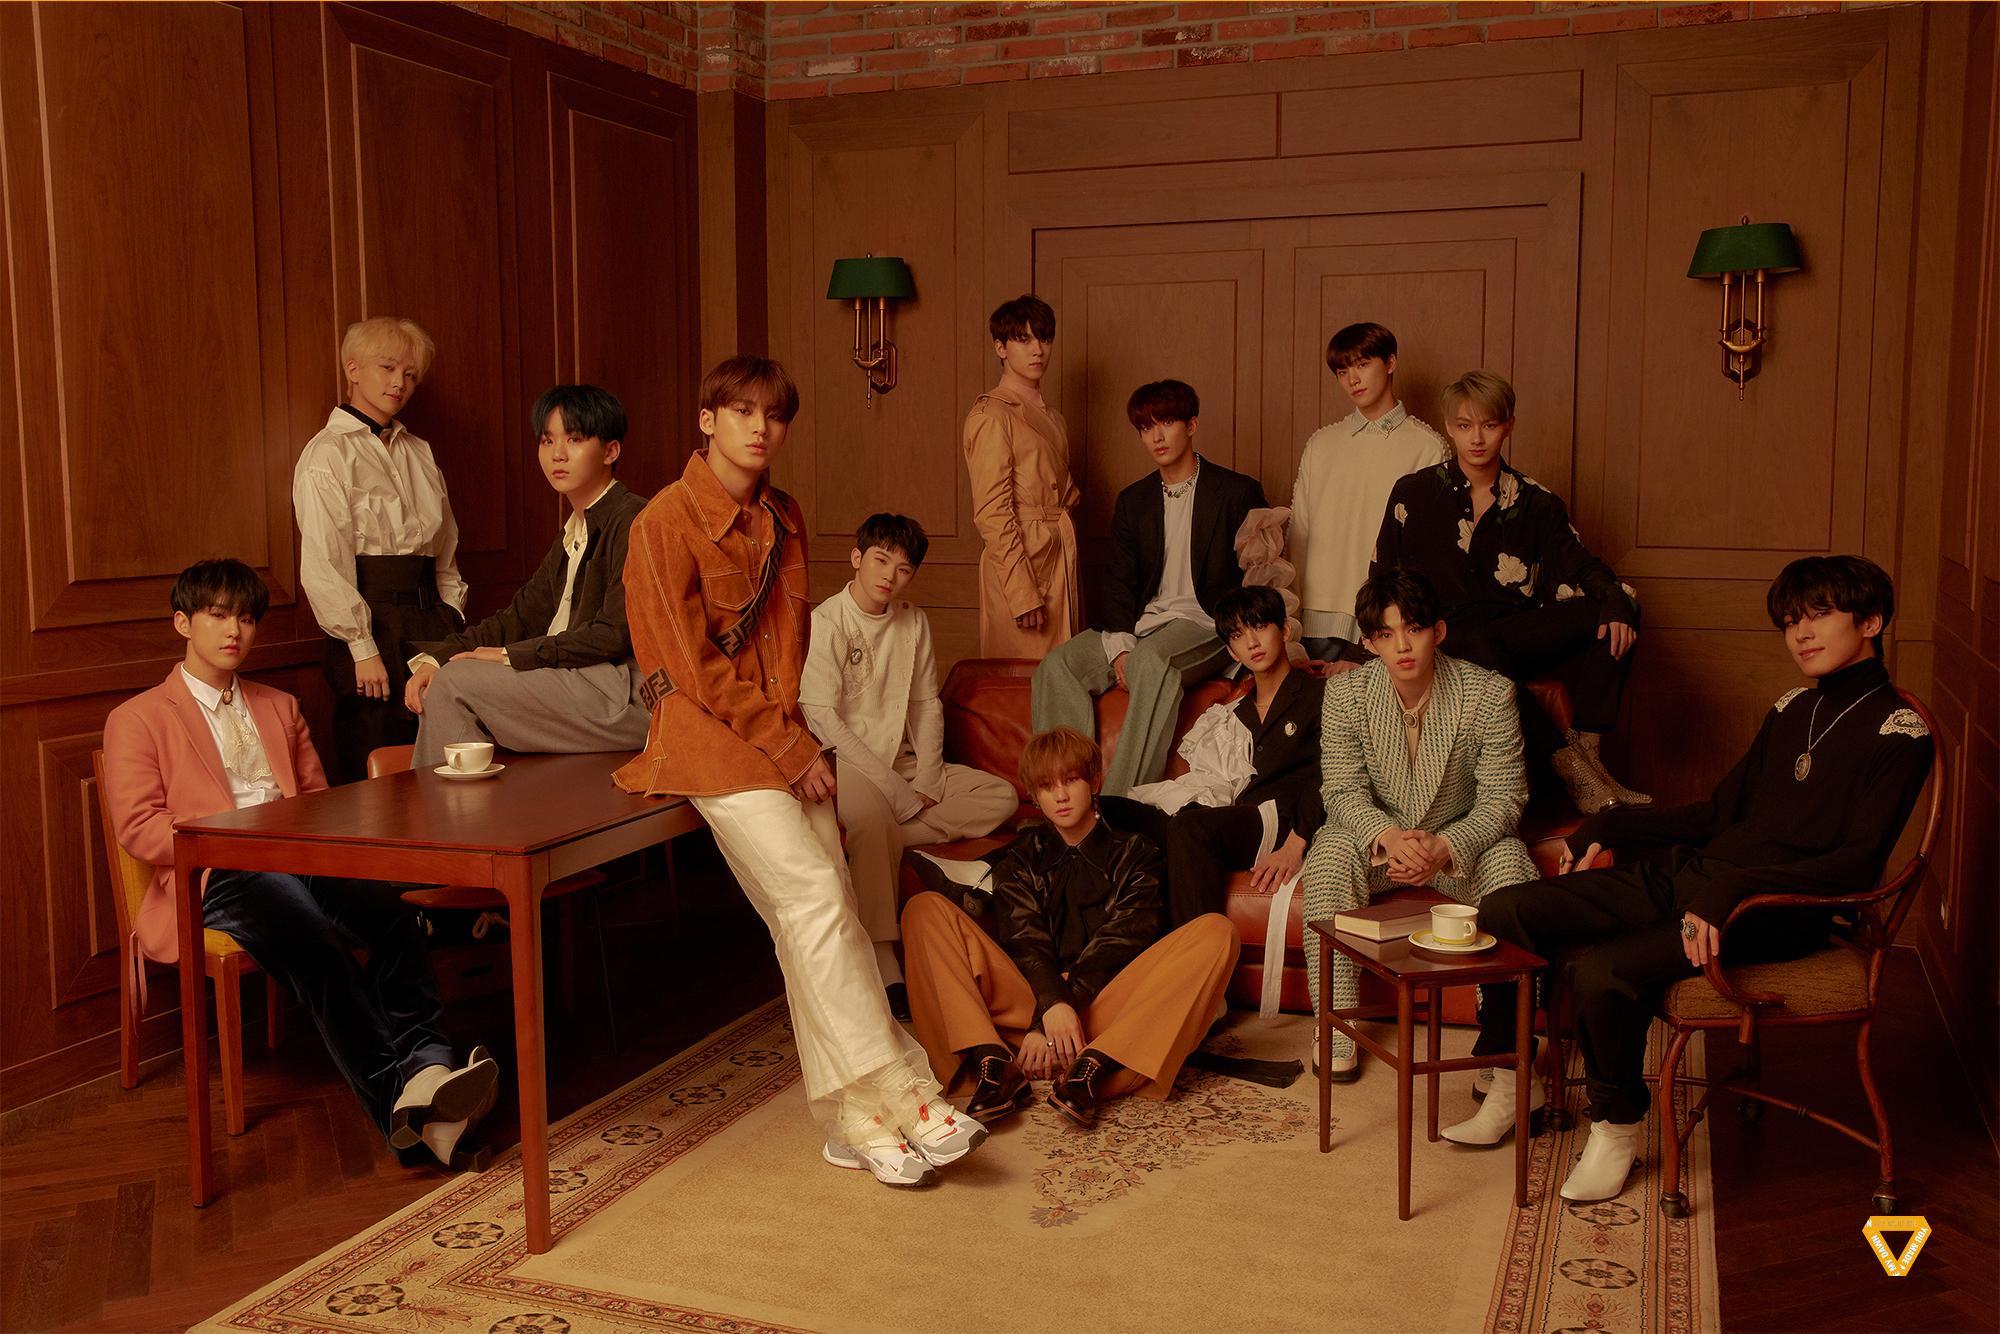 Seventeen Shows Maturity in “You Made My Dawn”